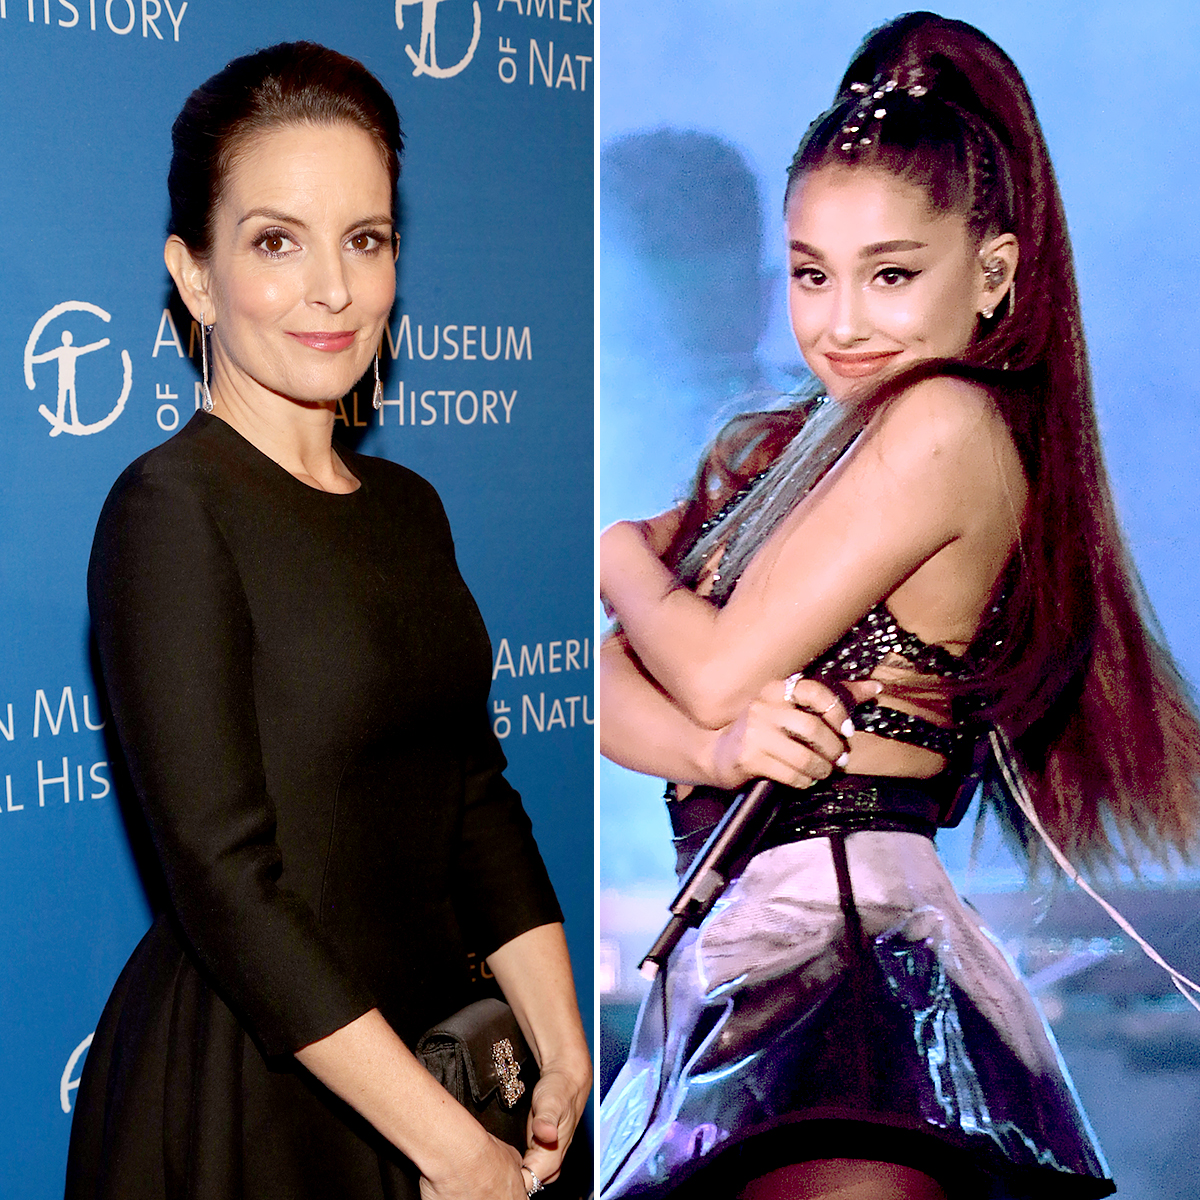 Tina Fey Was Honored By Ariana Grandes Thank U Next Video